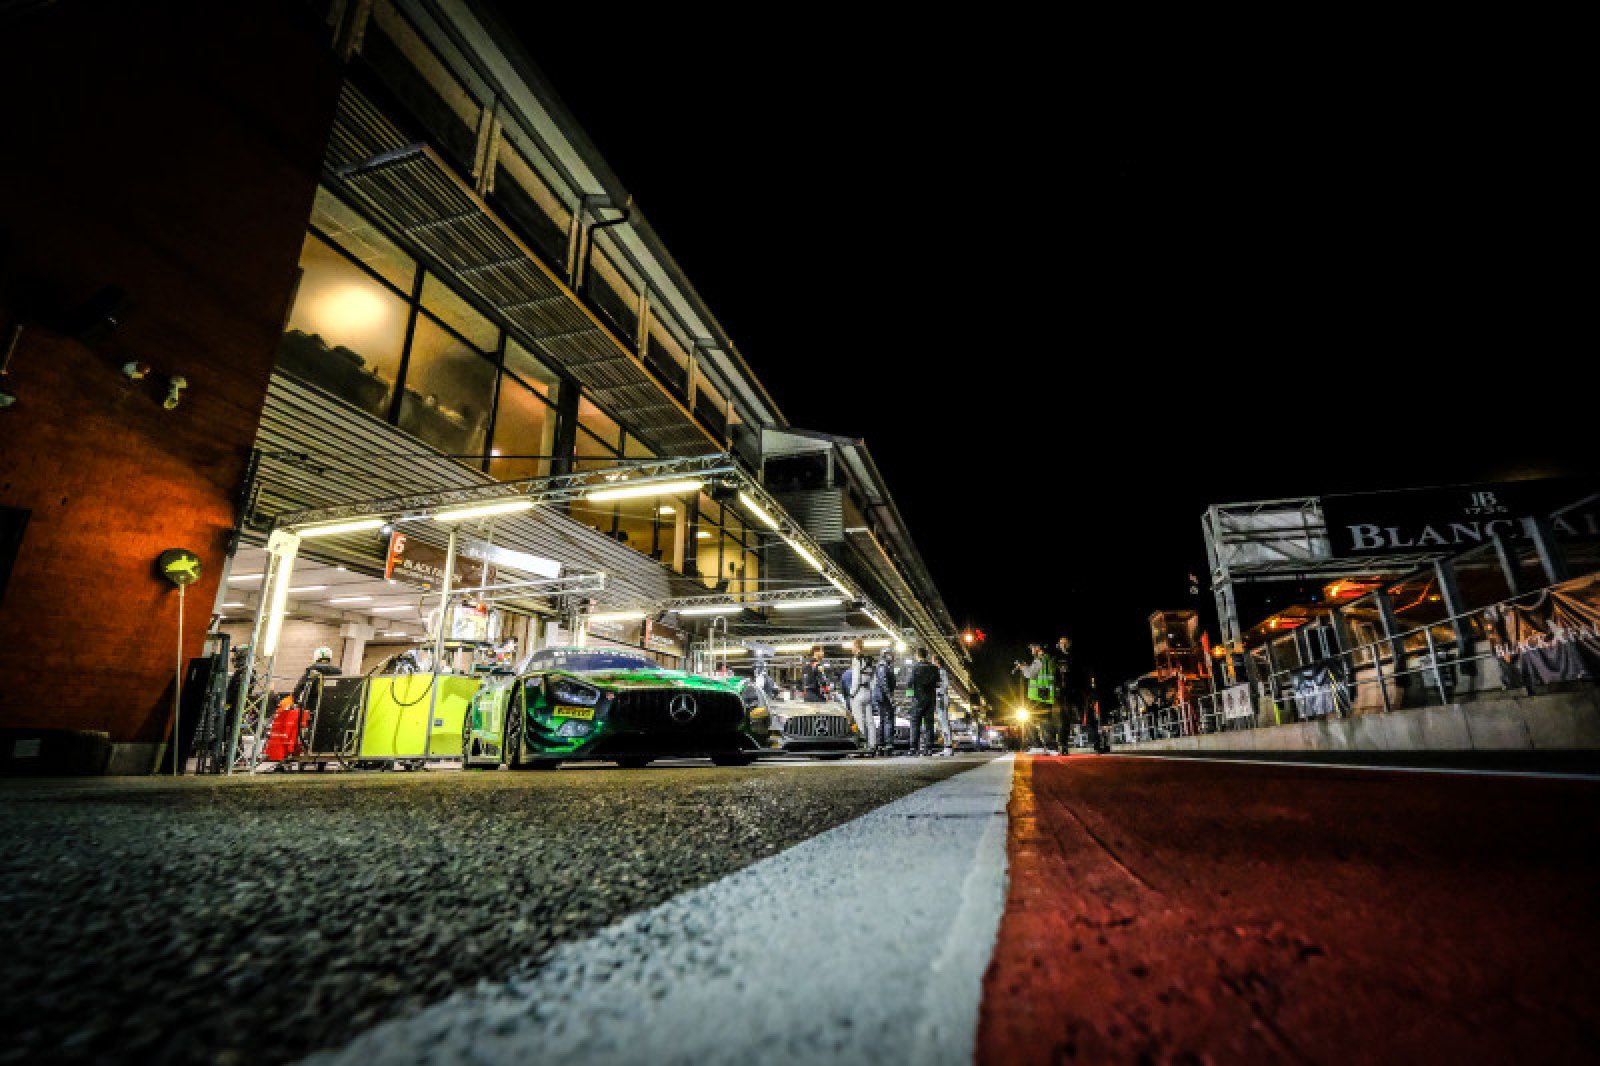 Challenging night hours during the Total 24 Hours of Spa